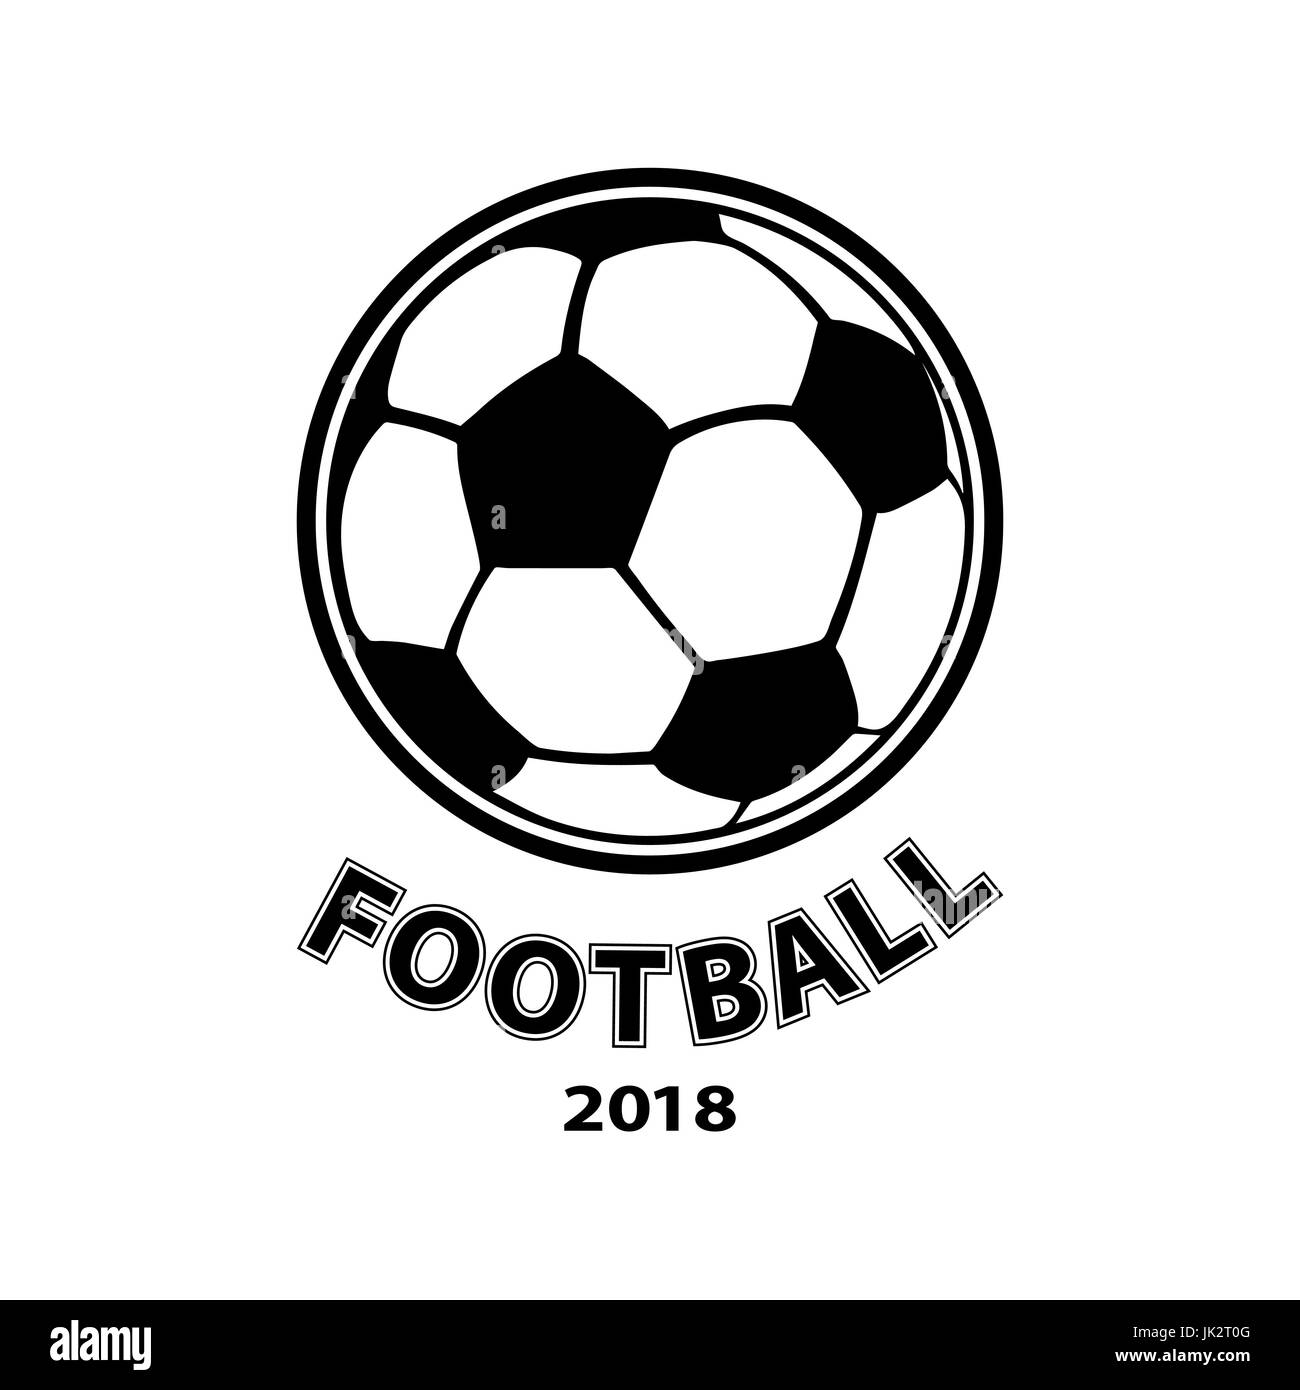 Football logo, ball icon, isolated on white background. Vector illustration Stock Vector